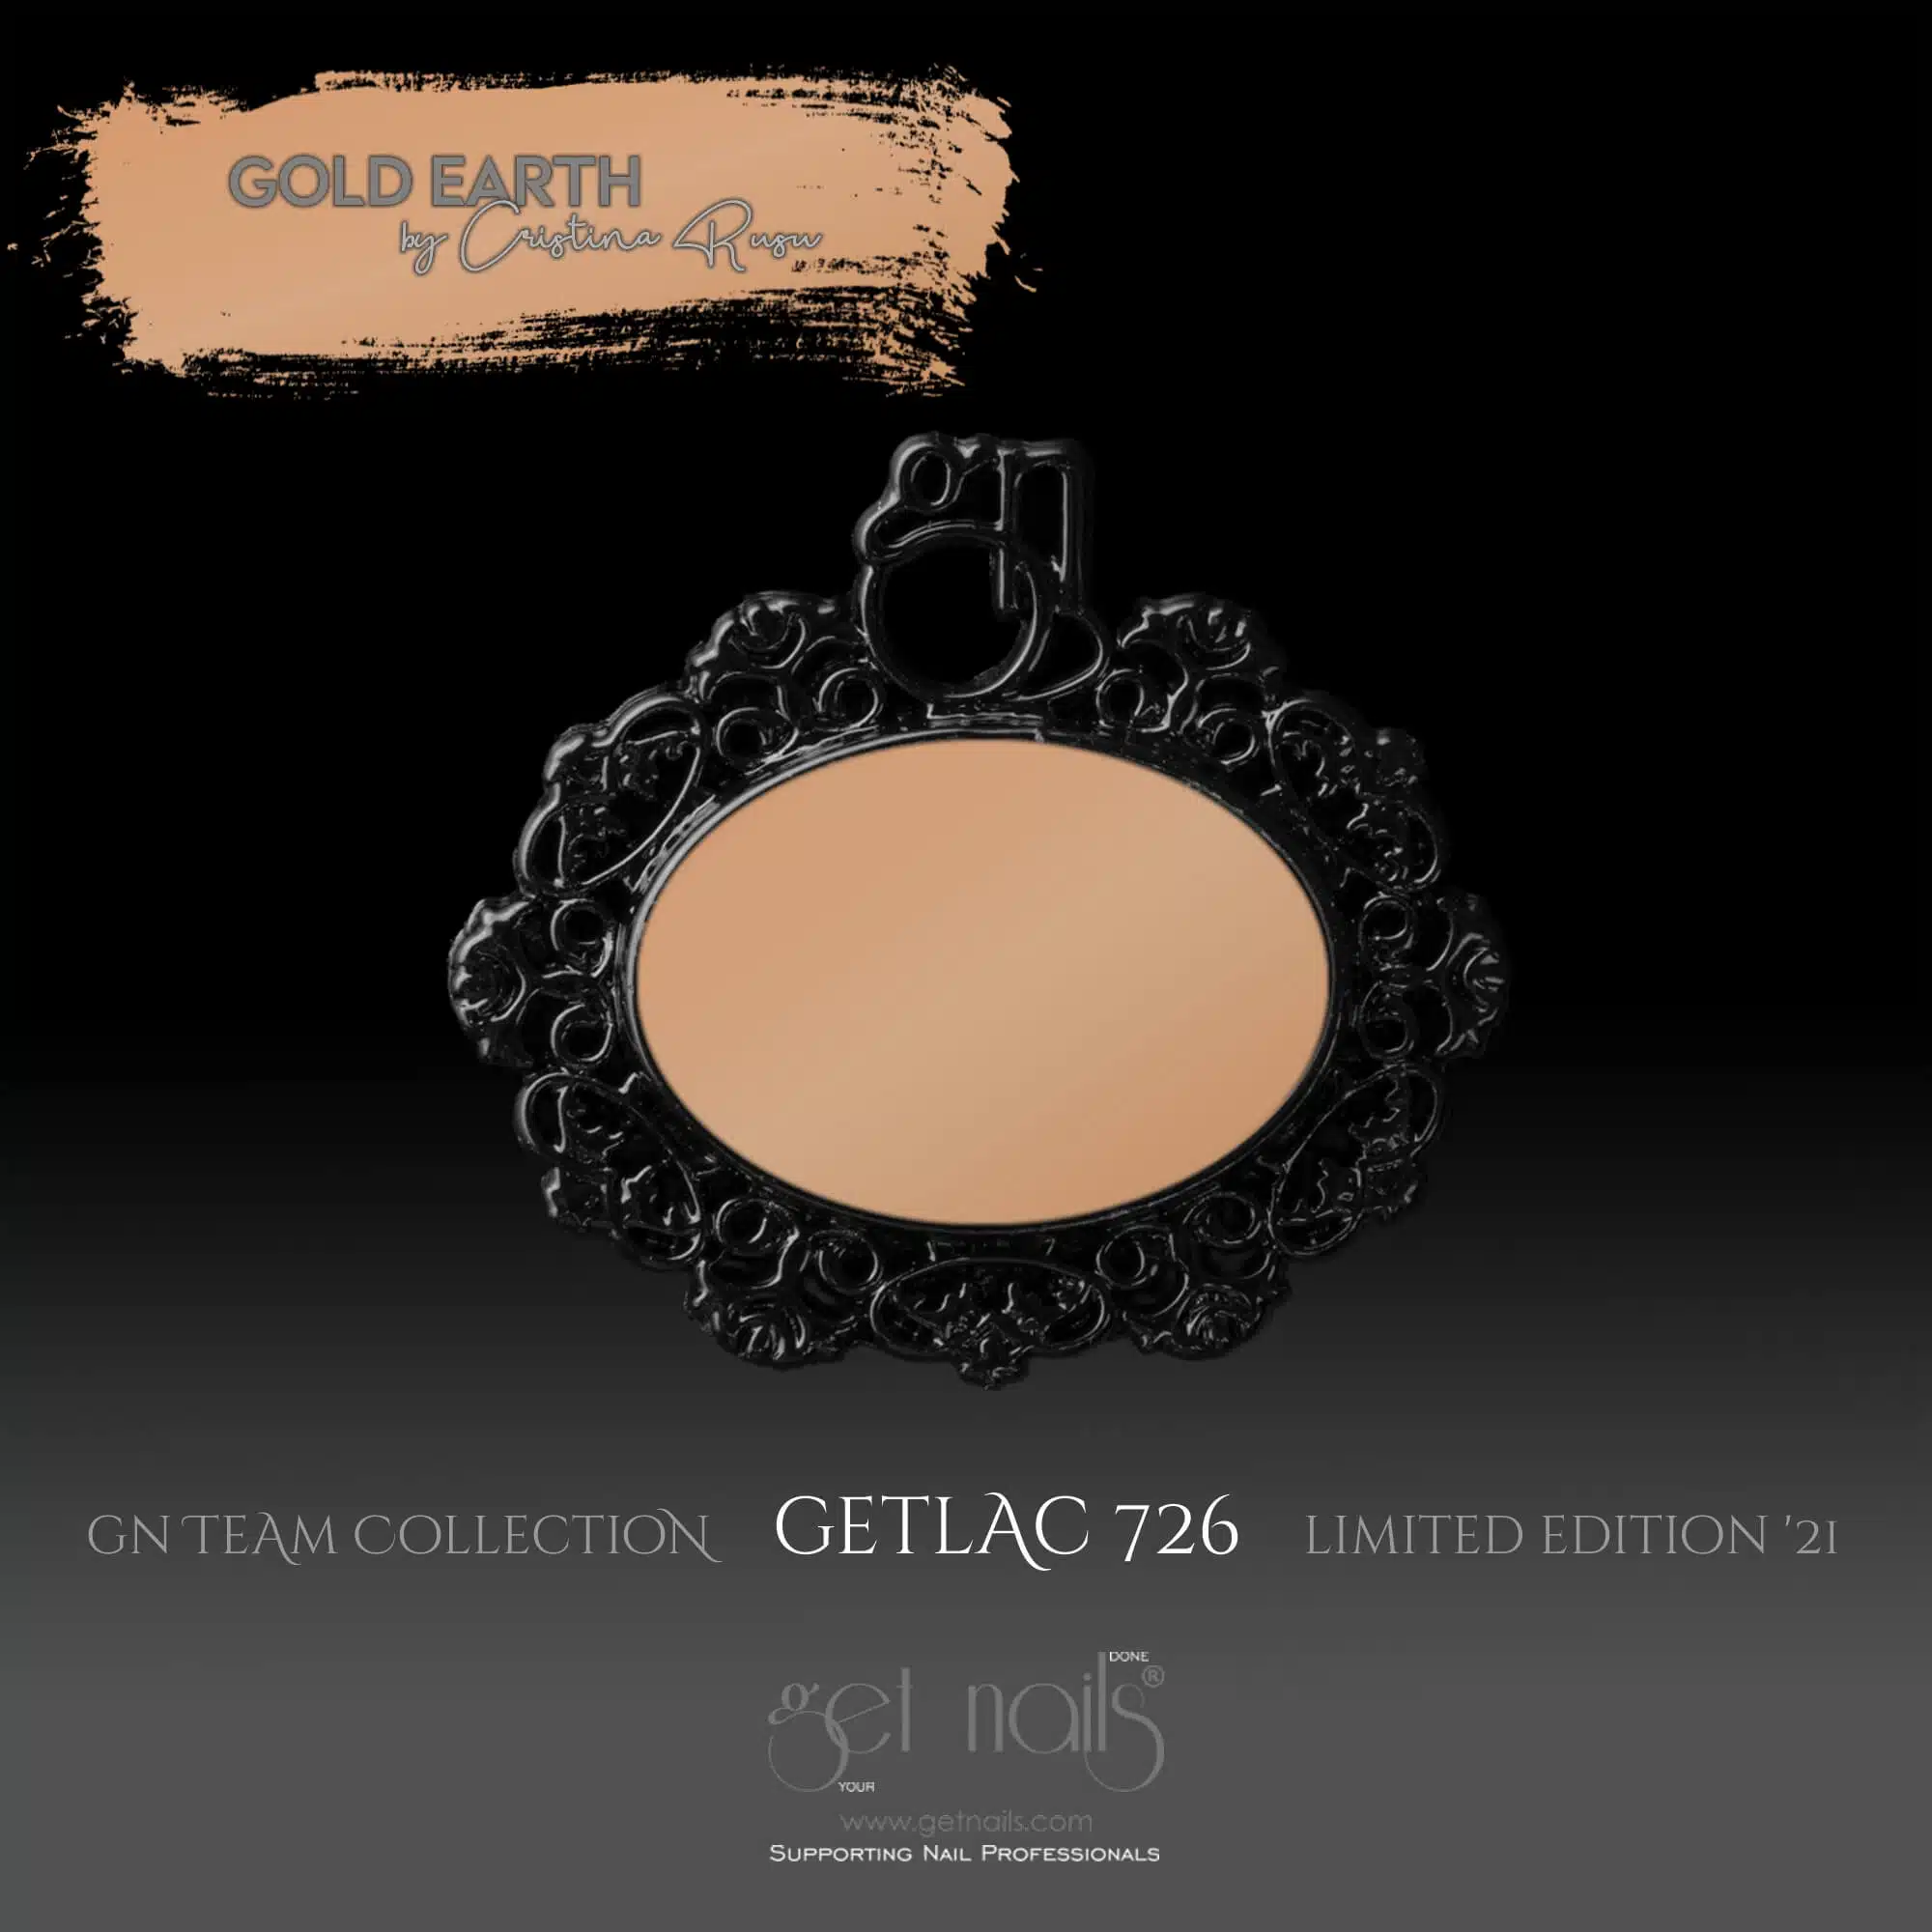 Get Nails Austria — GetLac 726 15 г Gold Earth